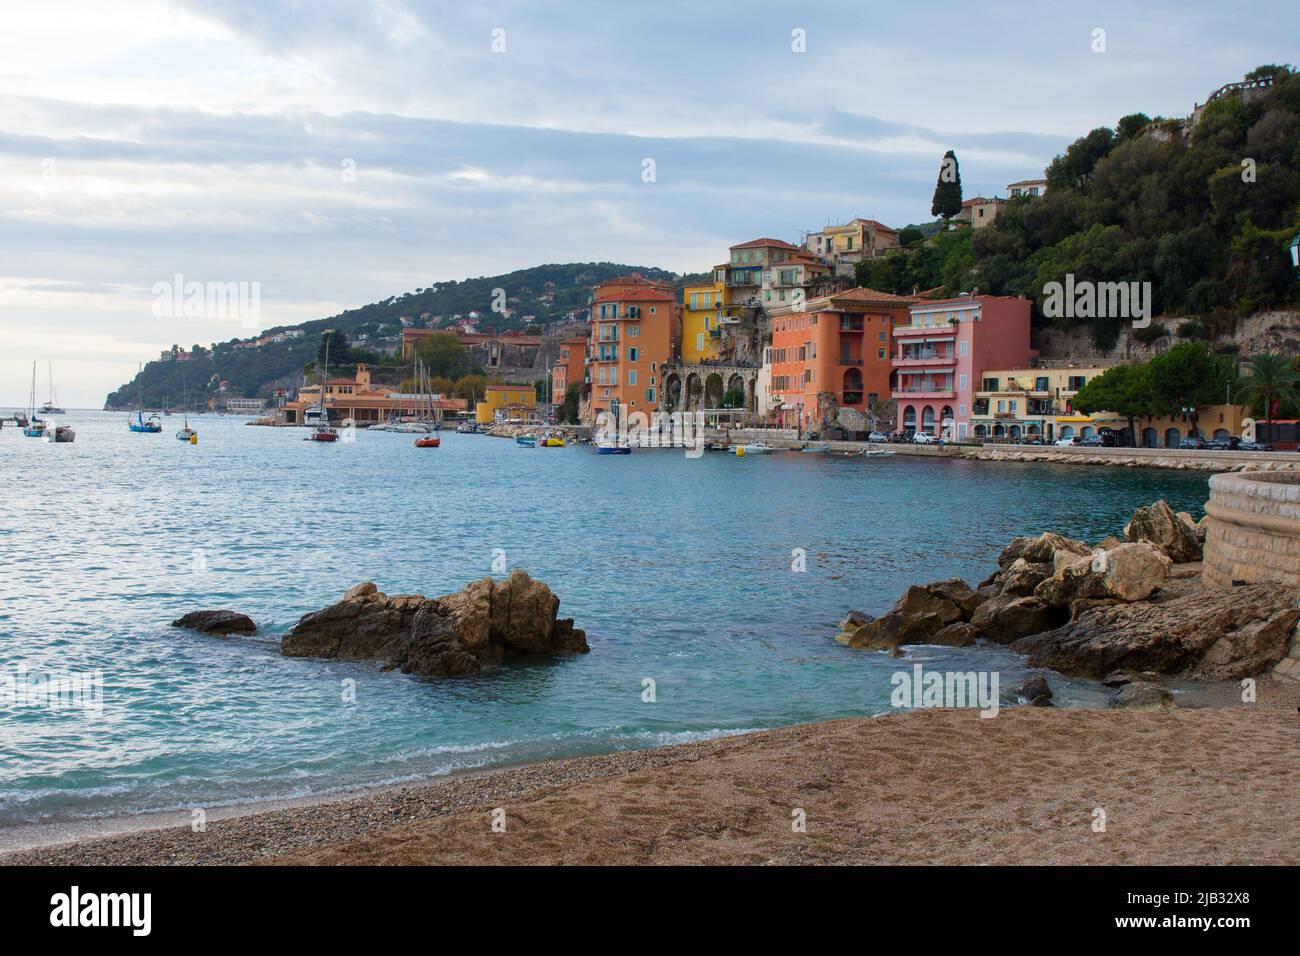 Evening on the Cote d'Azur, France. Mediterranean city and commune in the southeast of France in the Provence region of Villefranche-sur-Mer. Stock Photo